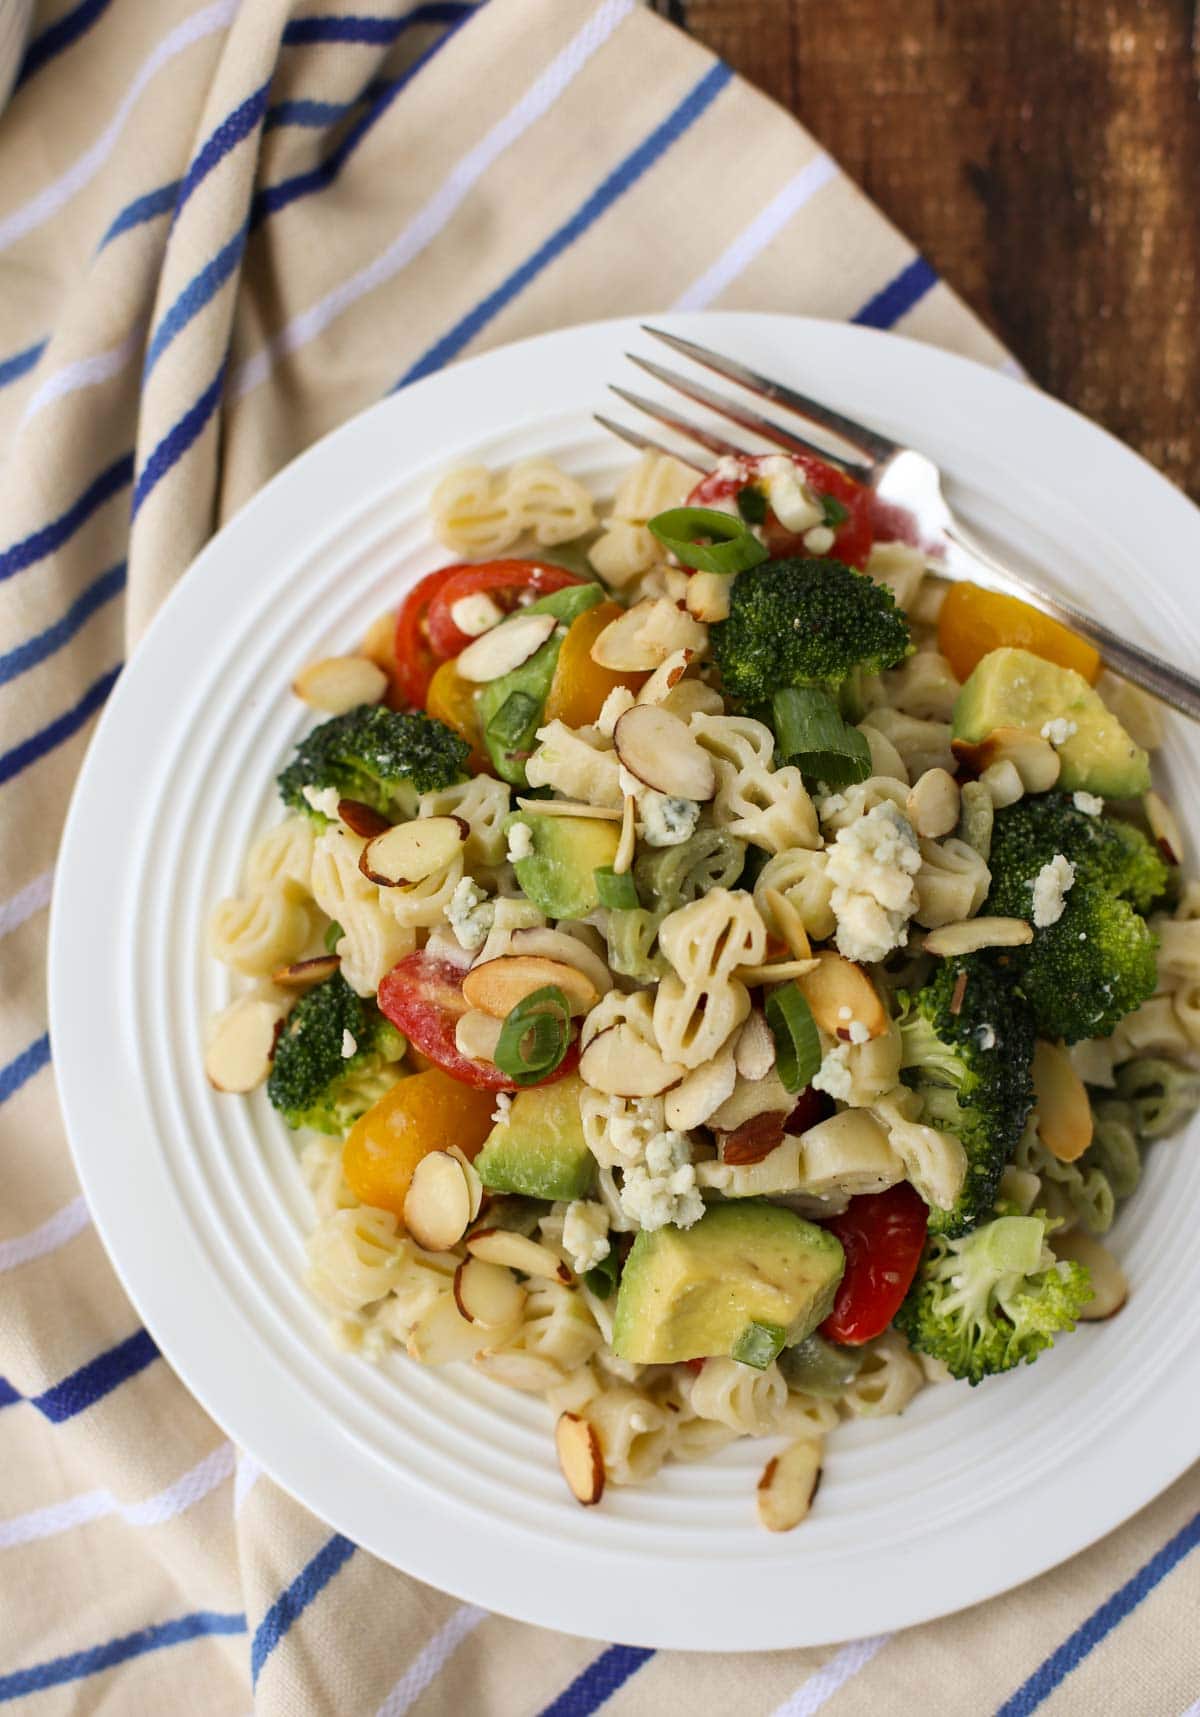 Blue Cheese Pasta Salad | Your favorite blue cheese veggies like cherry tomatoes and crunchy broccoli with toasted almonds and avocado! All tossed in a yummy blue cheese vinaigrette. Substitute feta for a lighter taste. Yum! | WorldofPastabilities.com